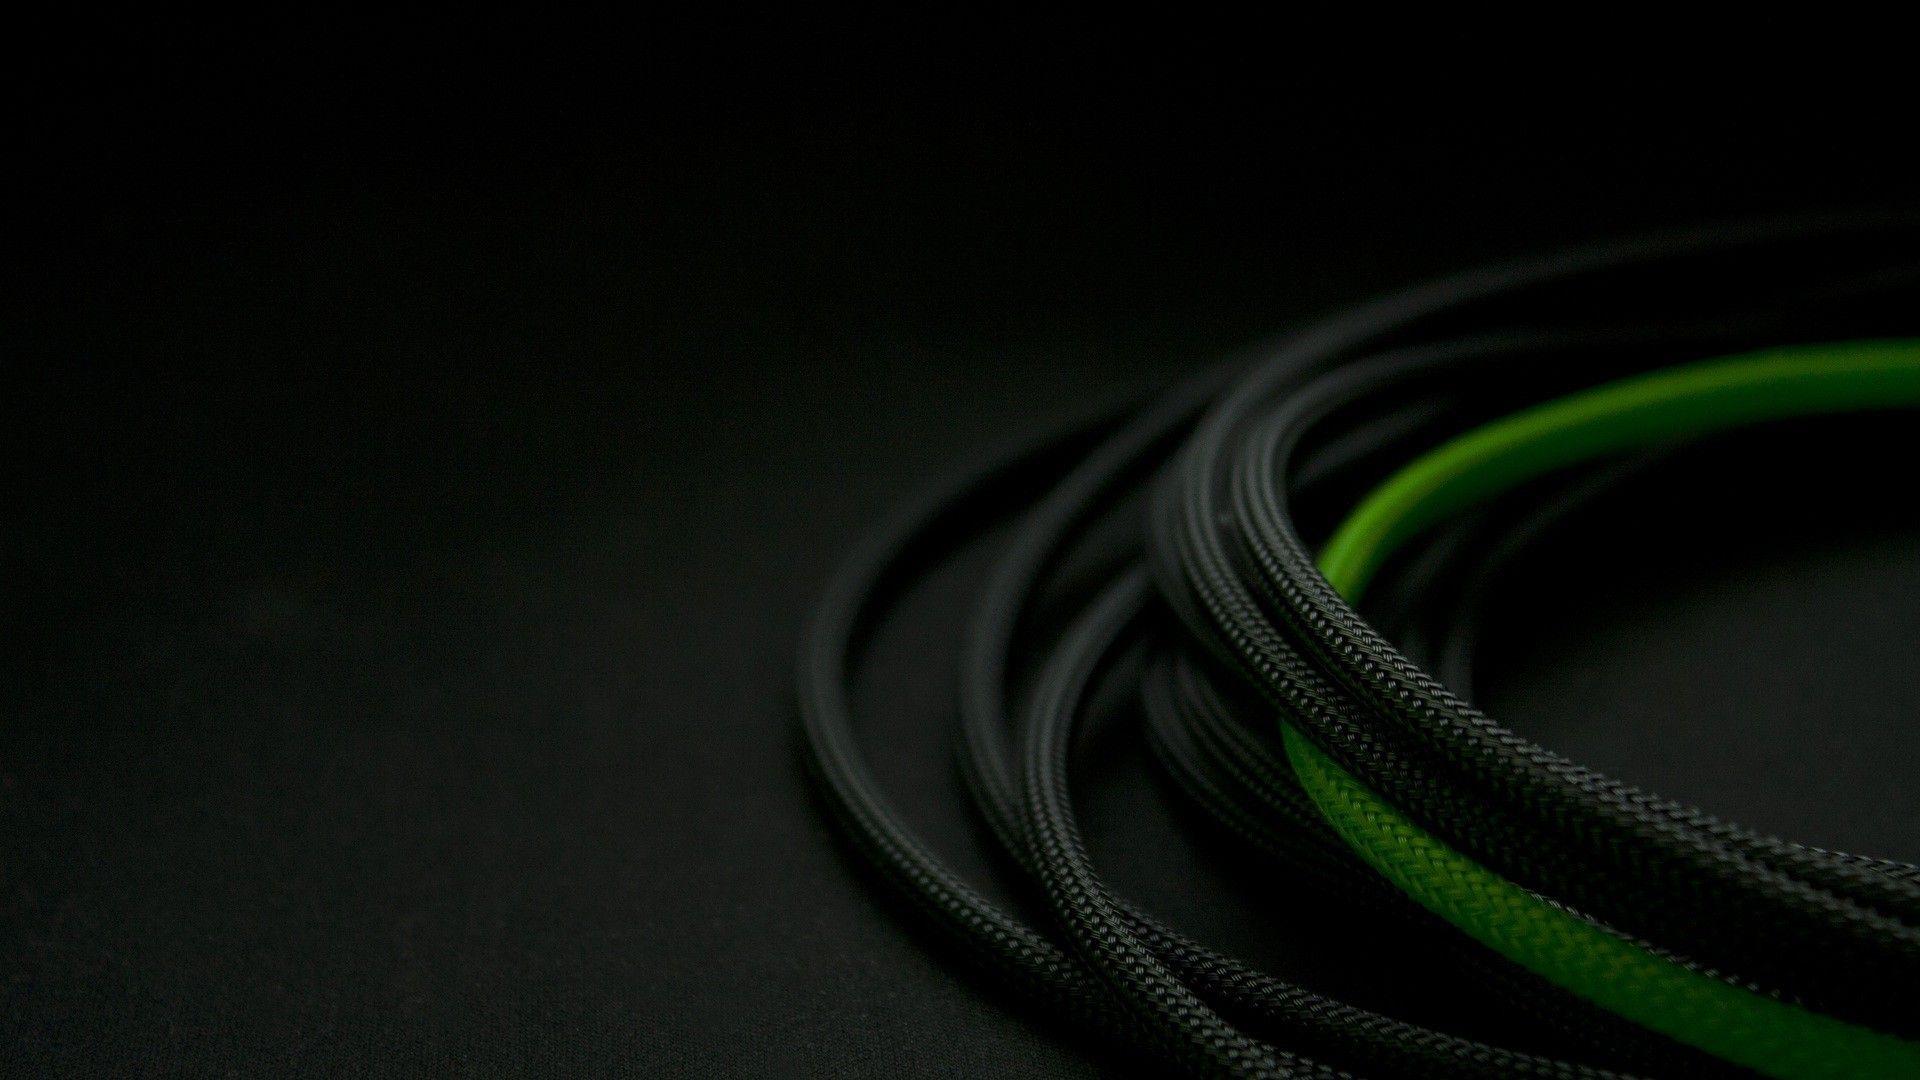 Black and Green Wallpaper 48724 1920x1080 px